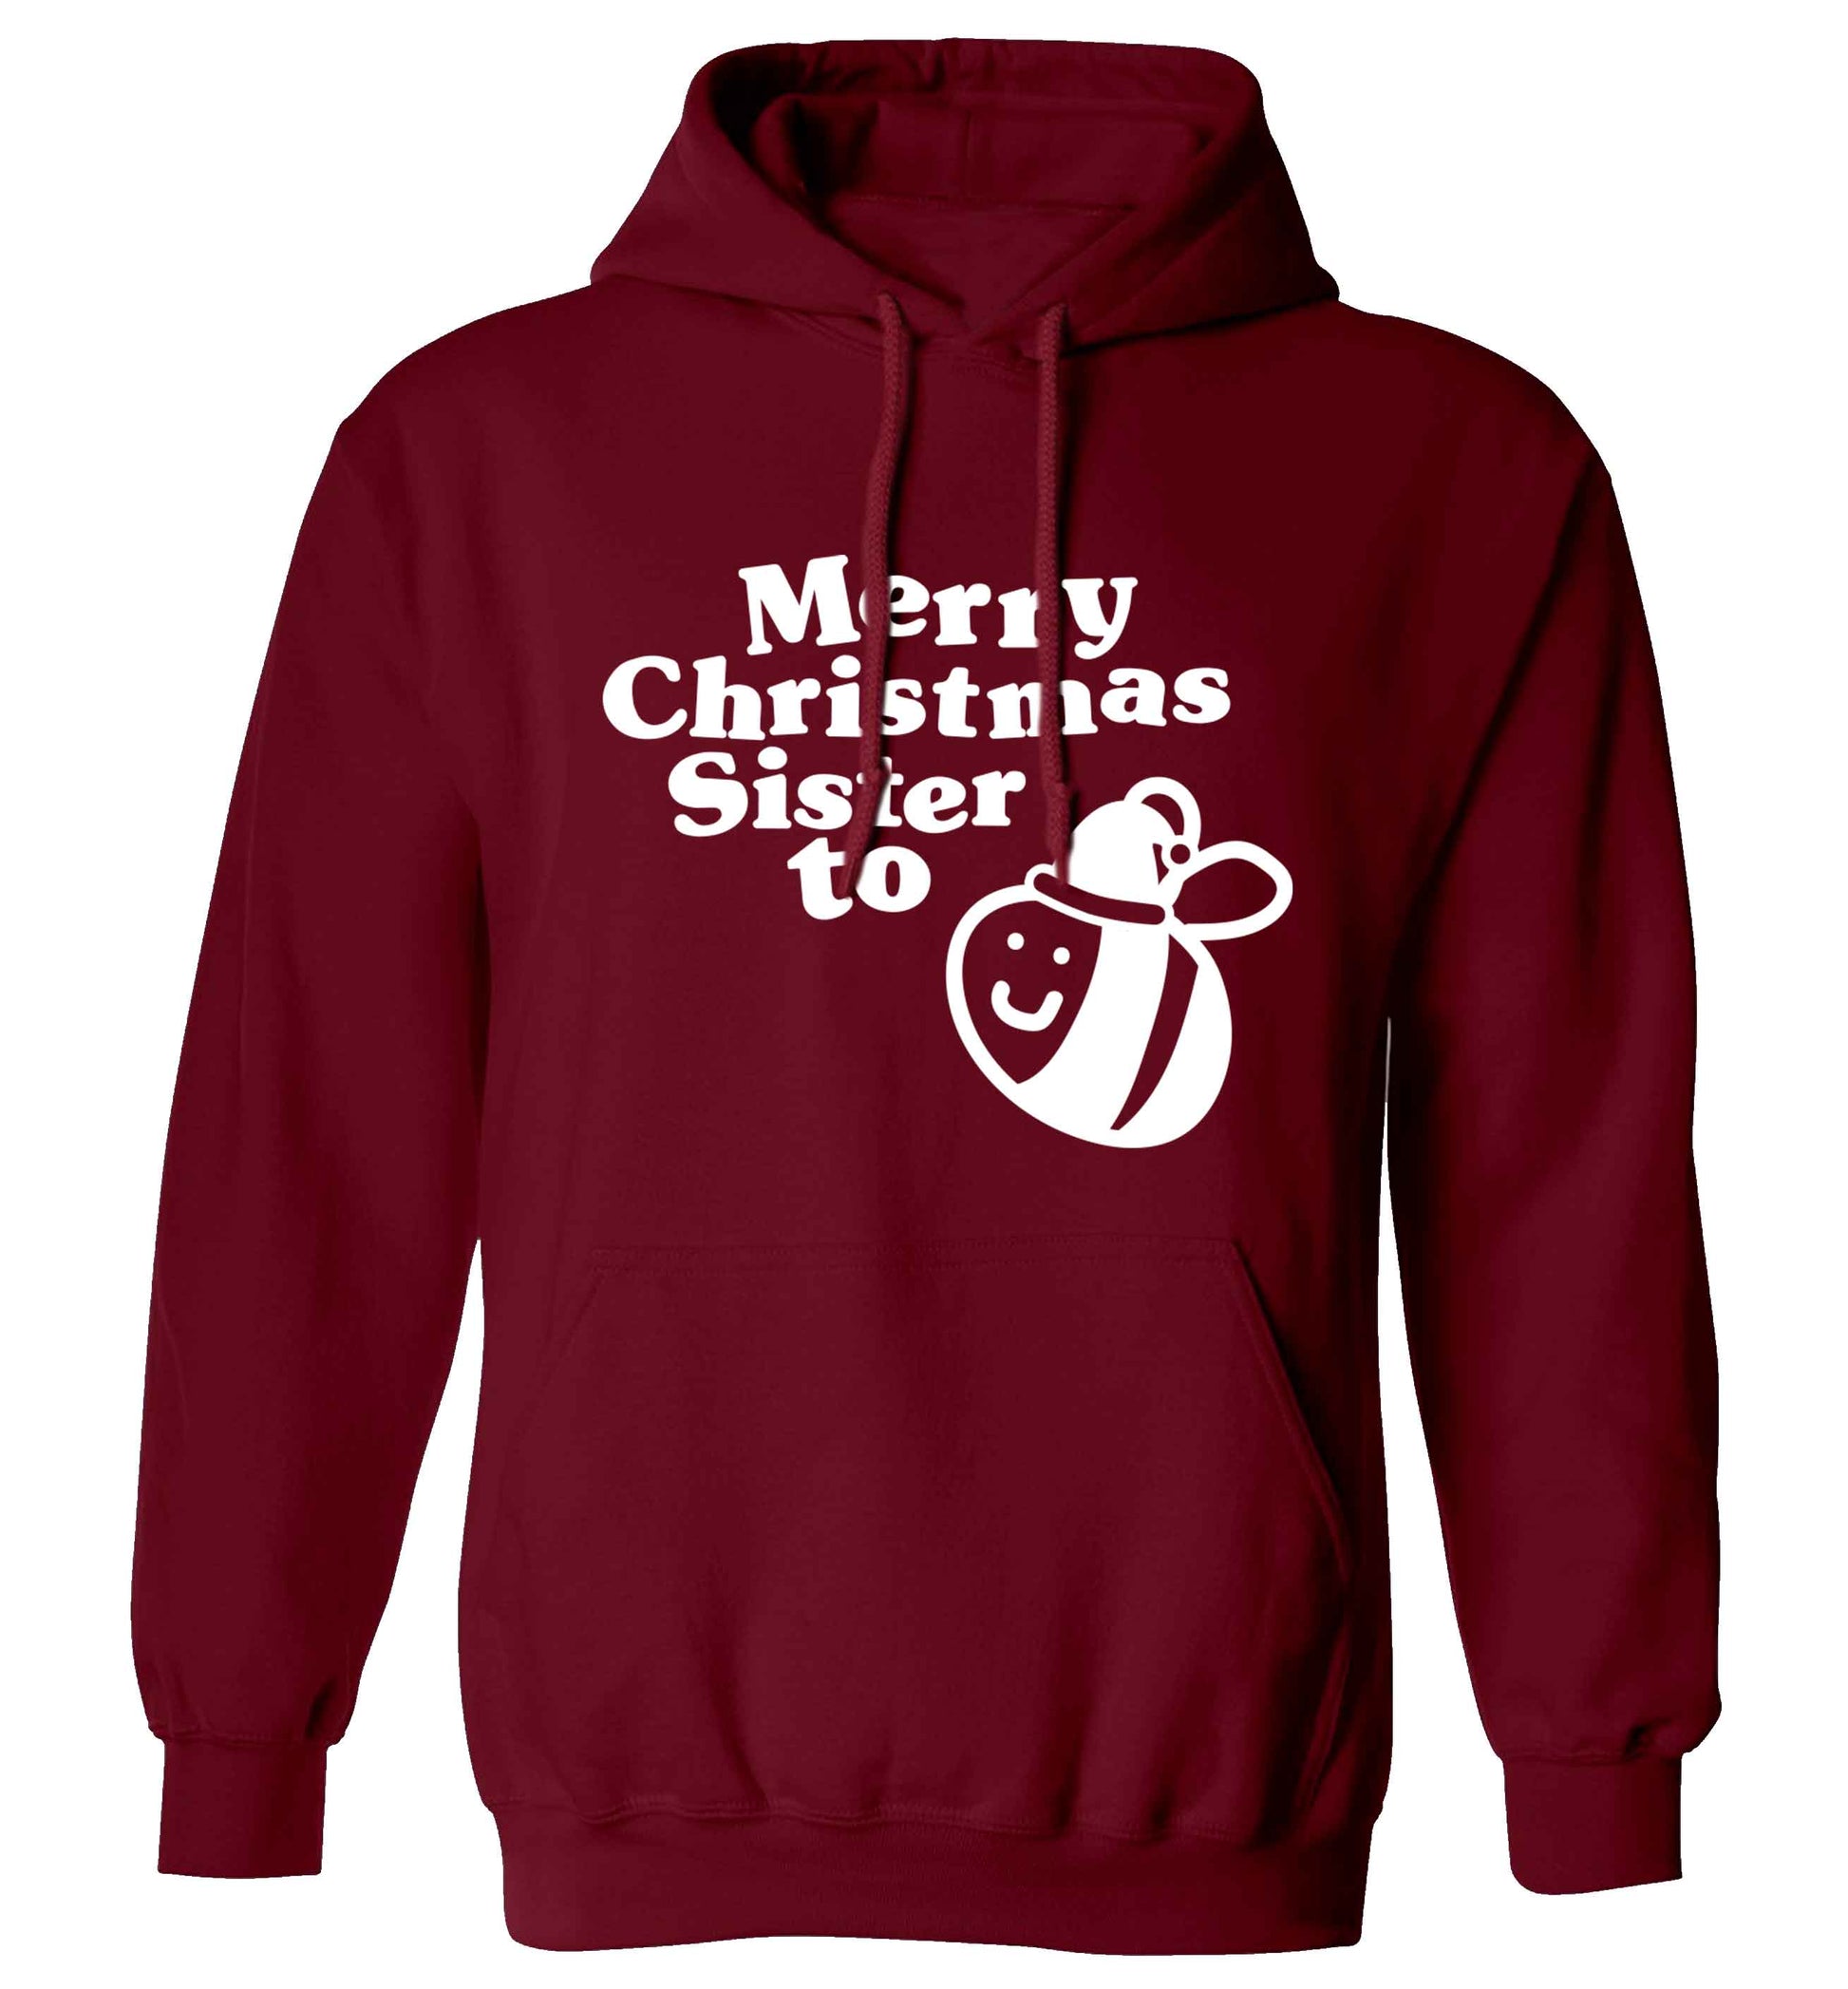 Merry Christmas sister to be adults unisex maroon hoodie 2XL